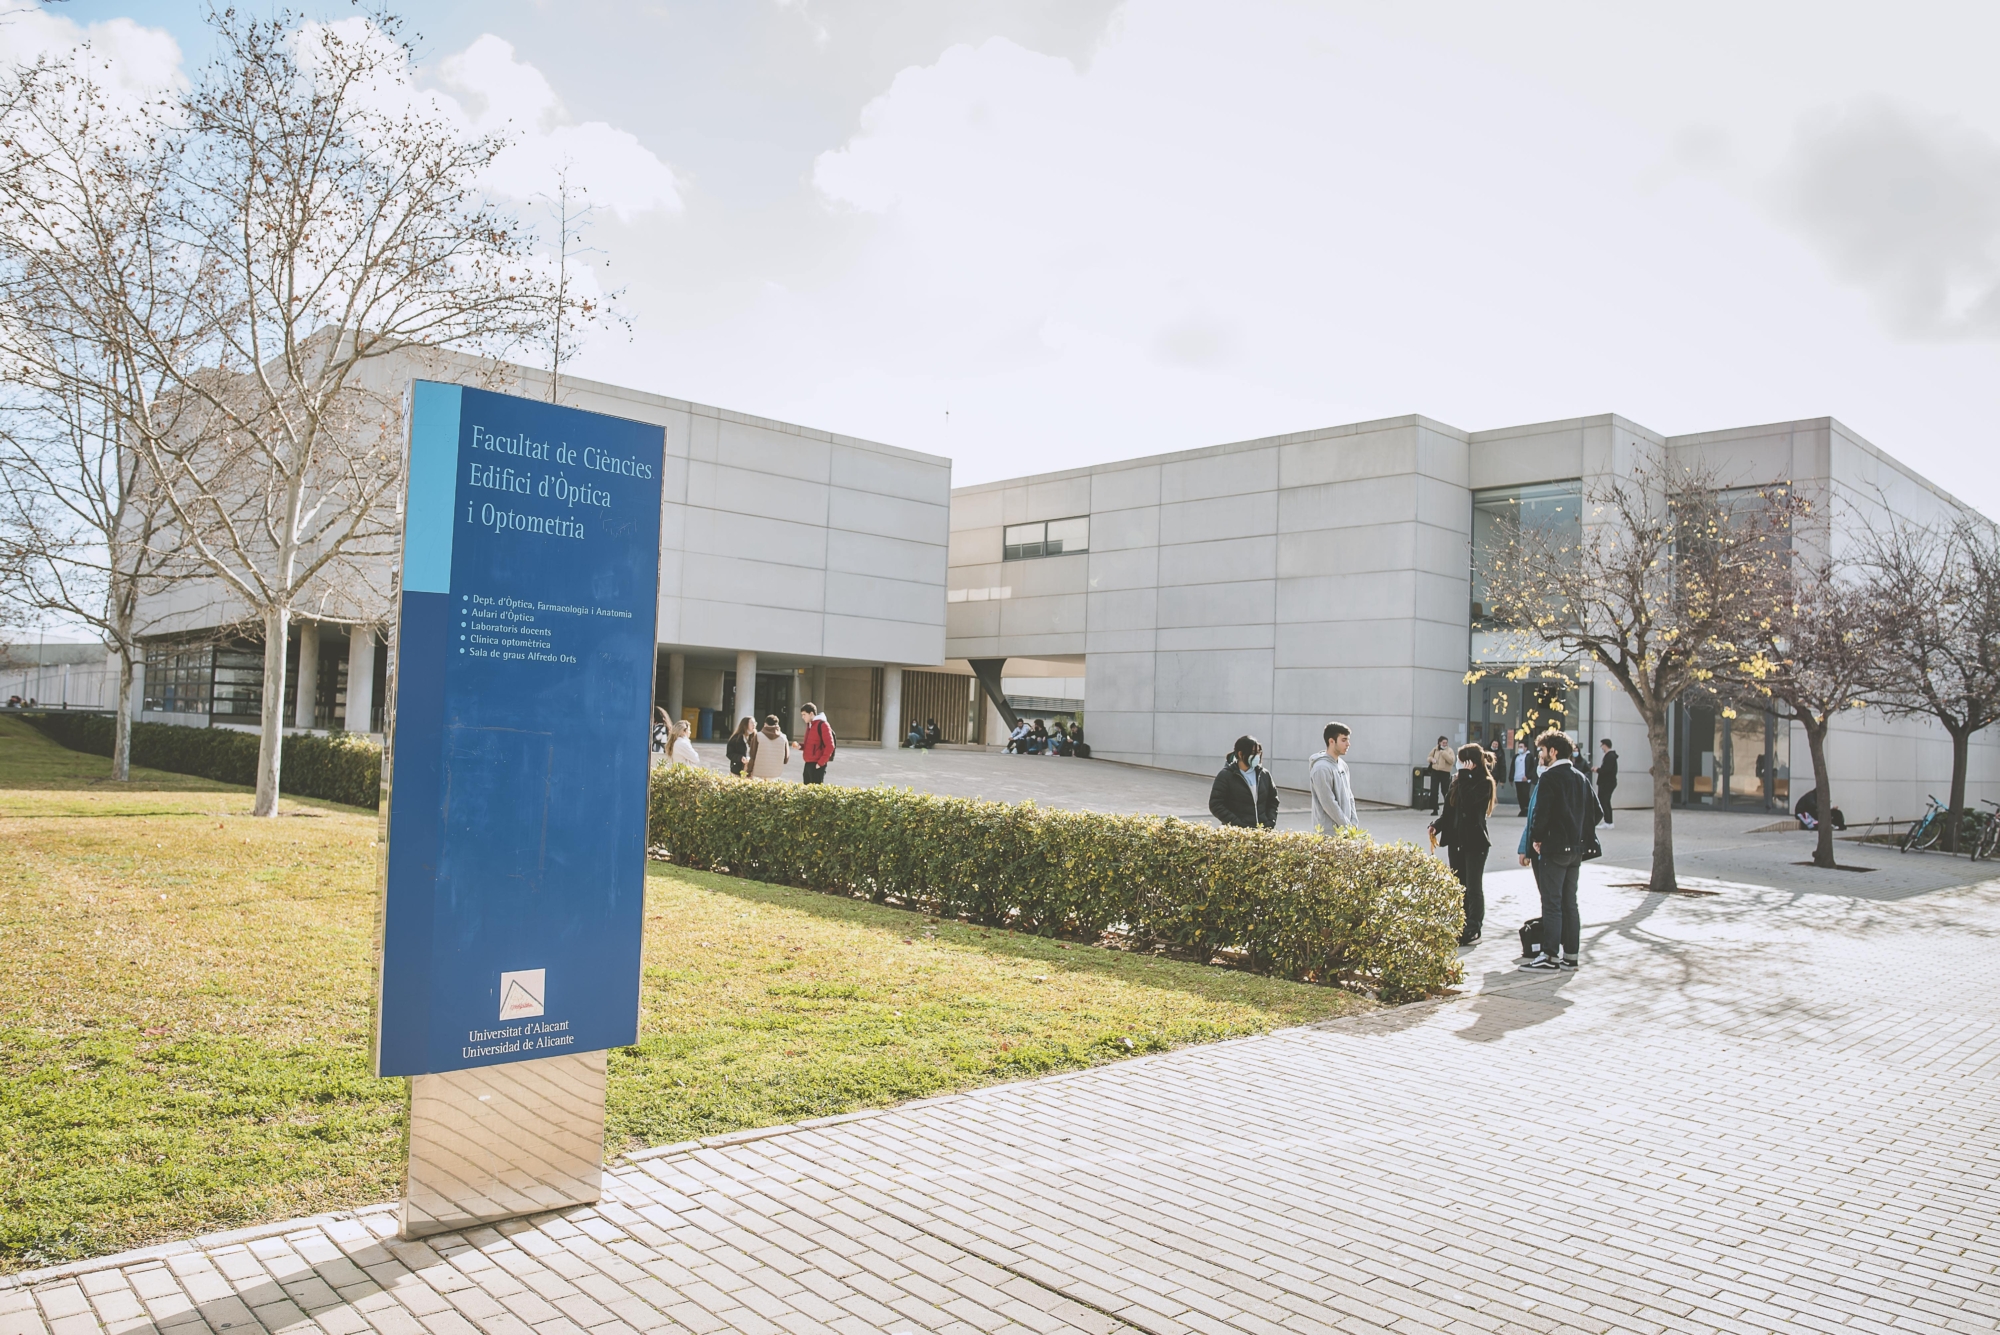 Exterior view of the University of Alicante